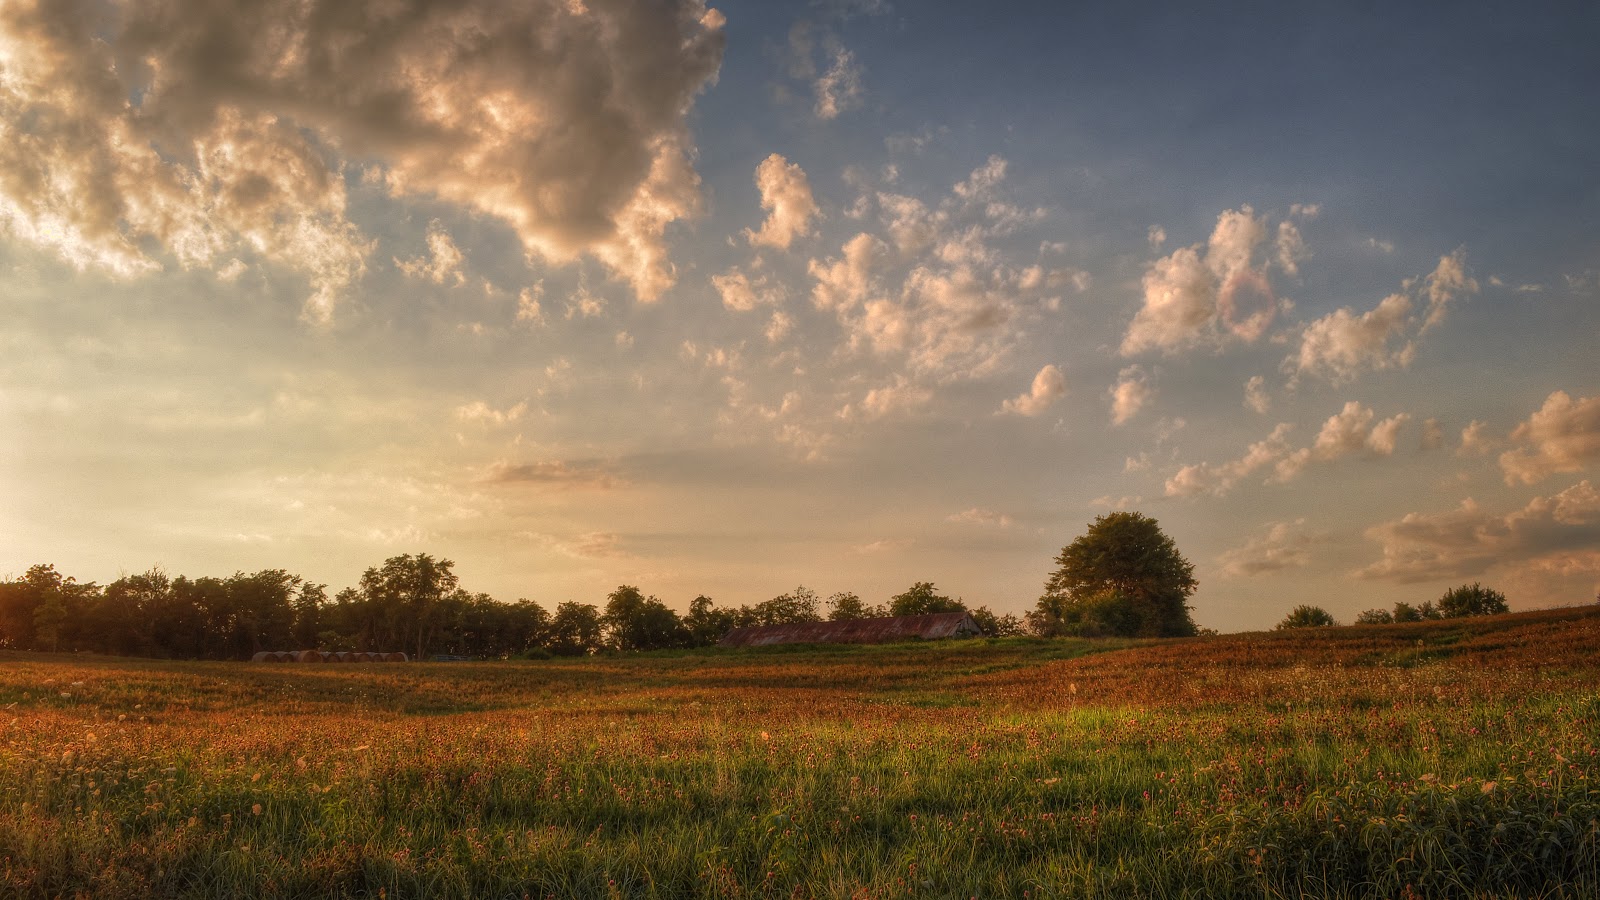 Golden Field - HDR | Time To Take Pictures - Travel and Landscape ...